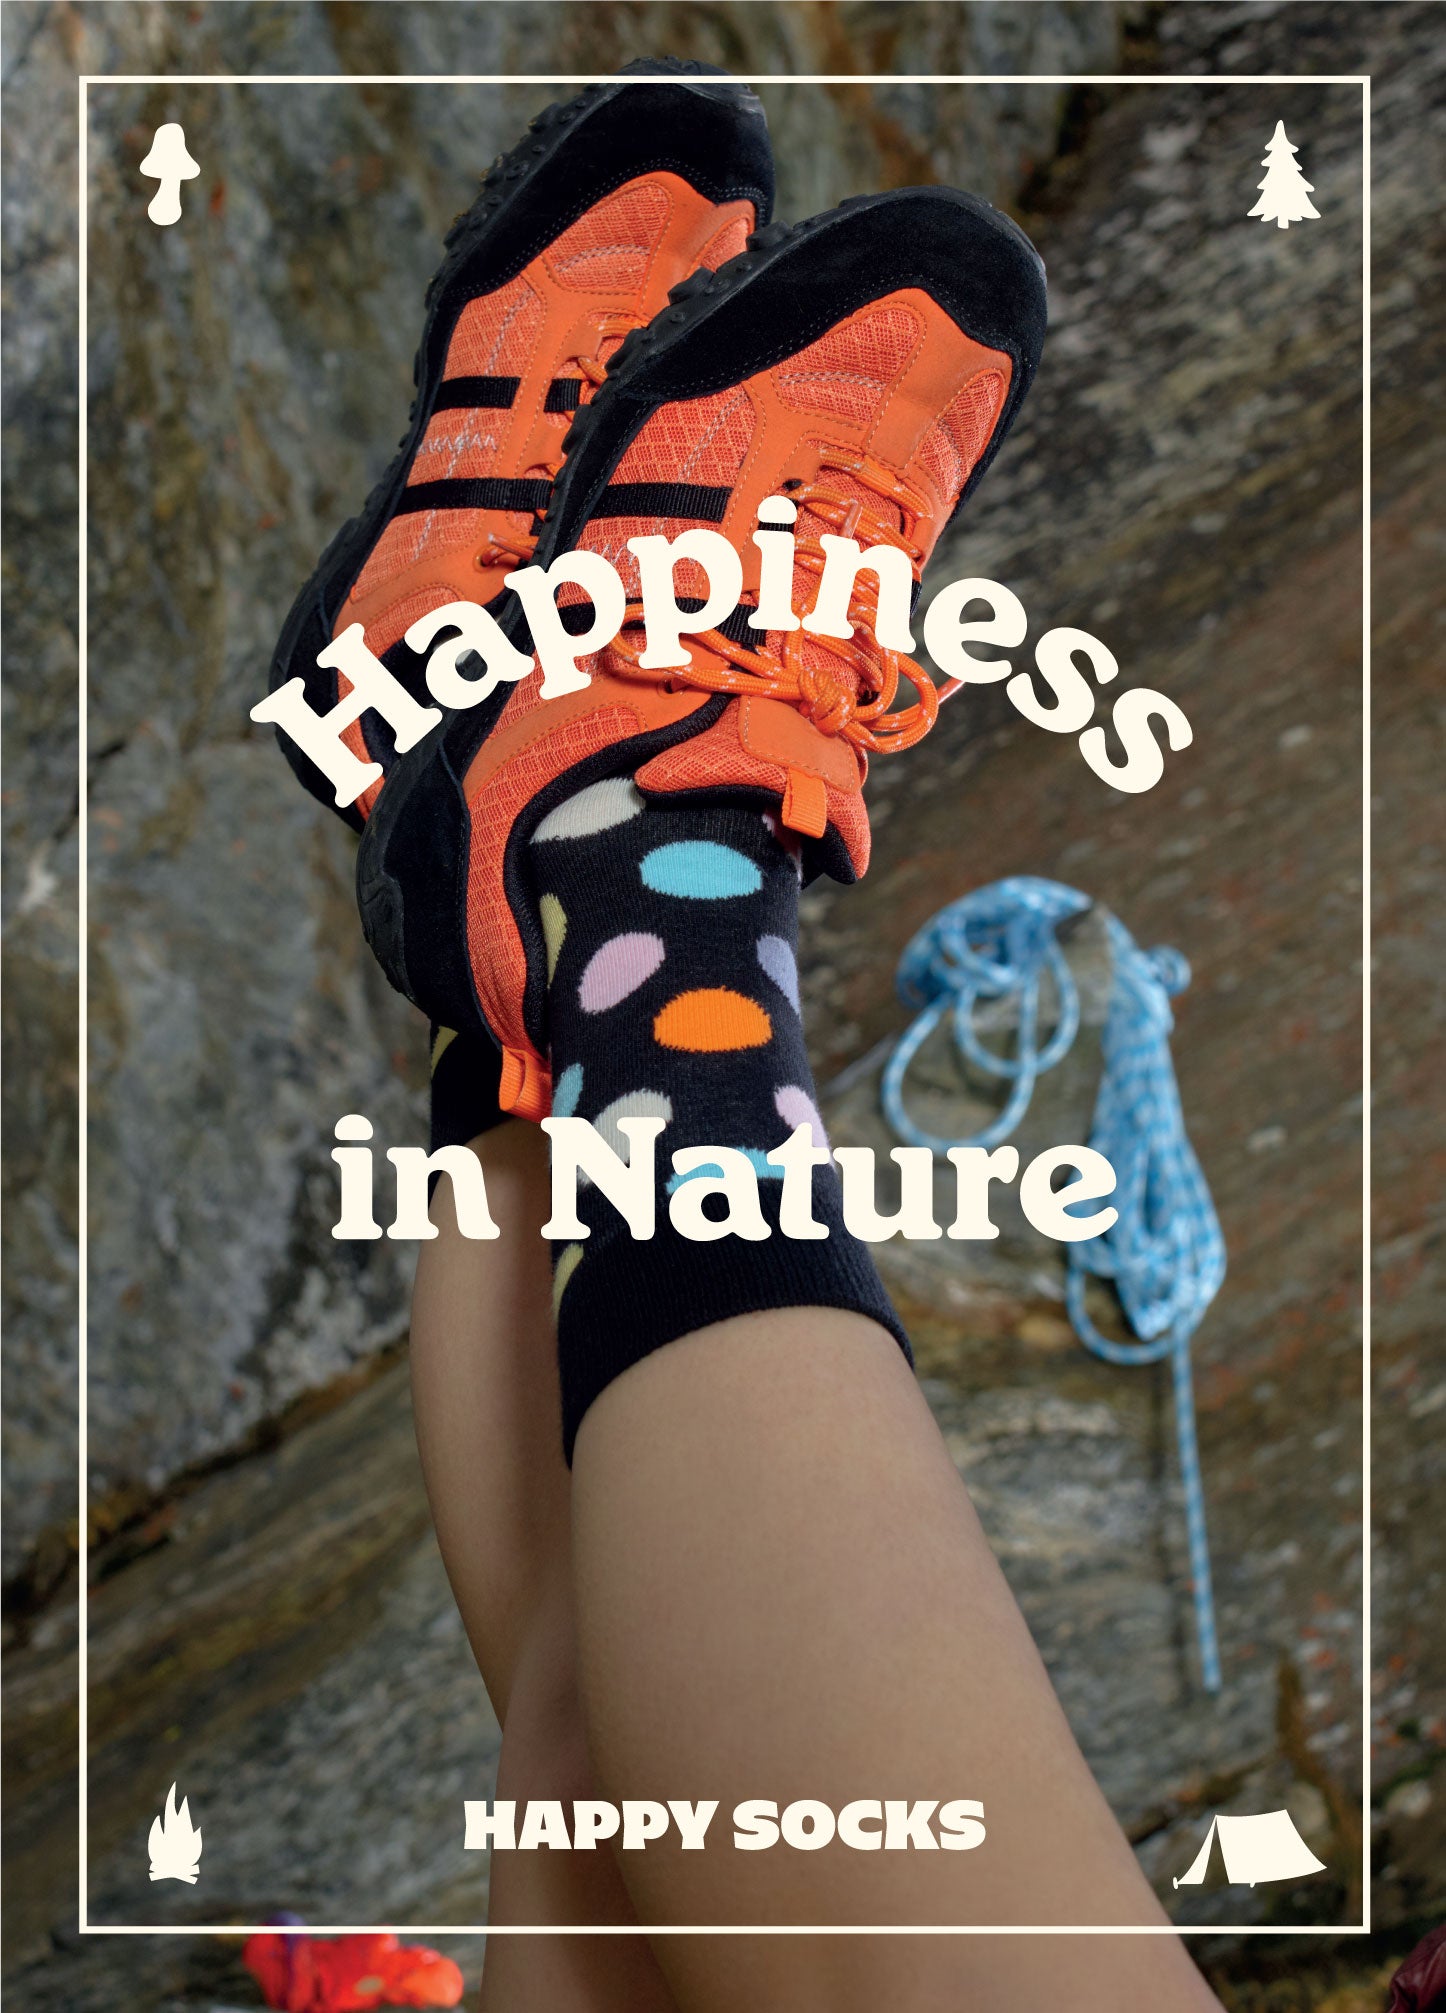 Experience happiness from head to toe with Happy Socks.